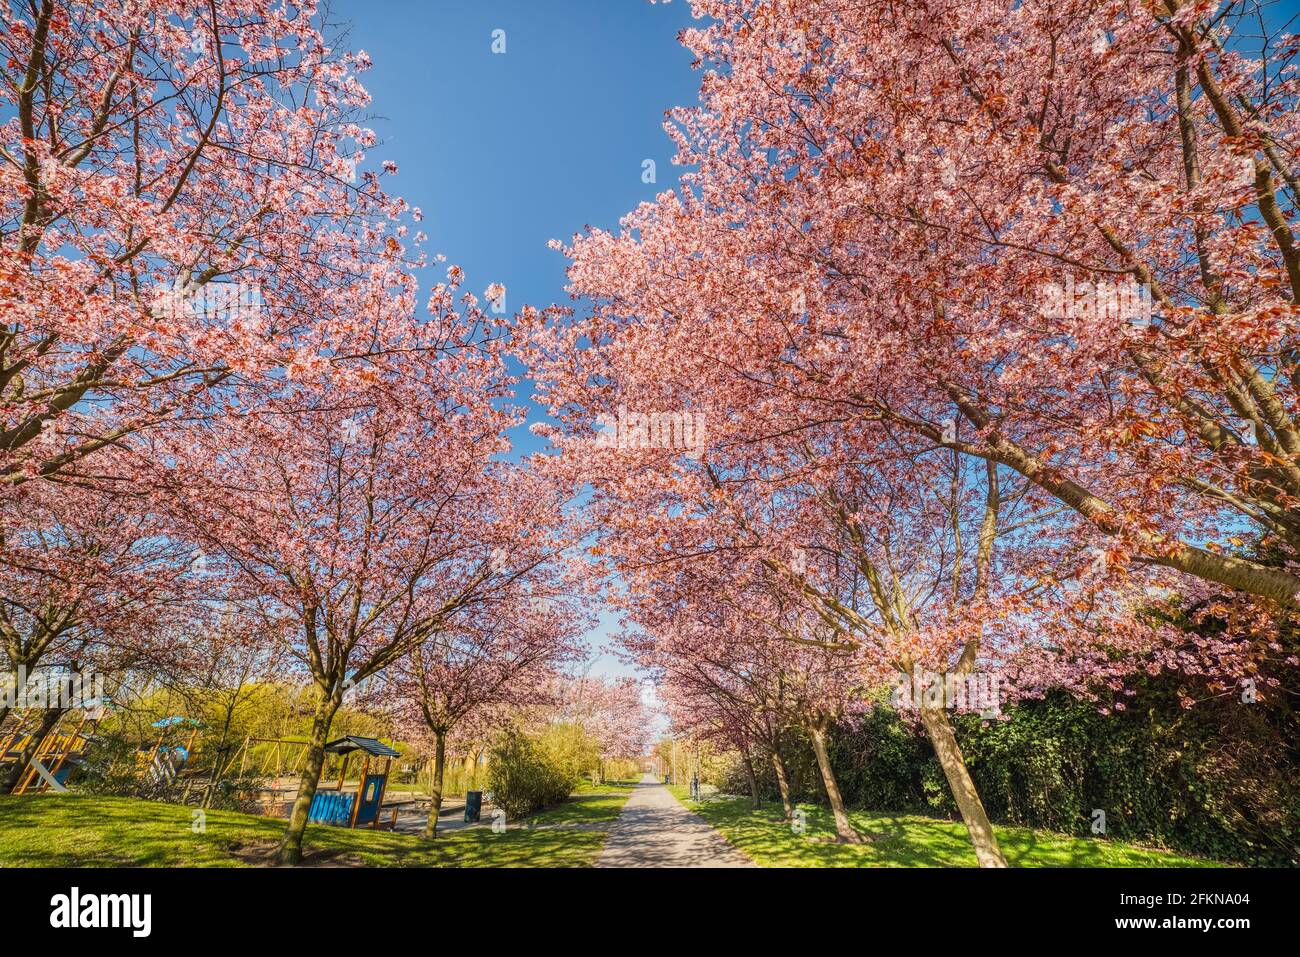 A Sakura cherry alley covered by pink flower blossoms on a calm, spring day with a kids playground. Tranquil, blooming cherry trees or cherry alleyway Stock Photo